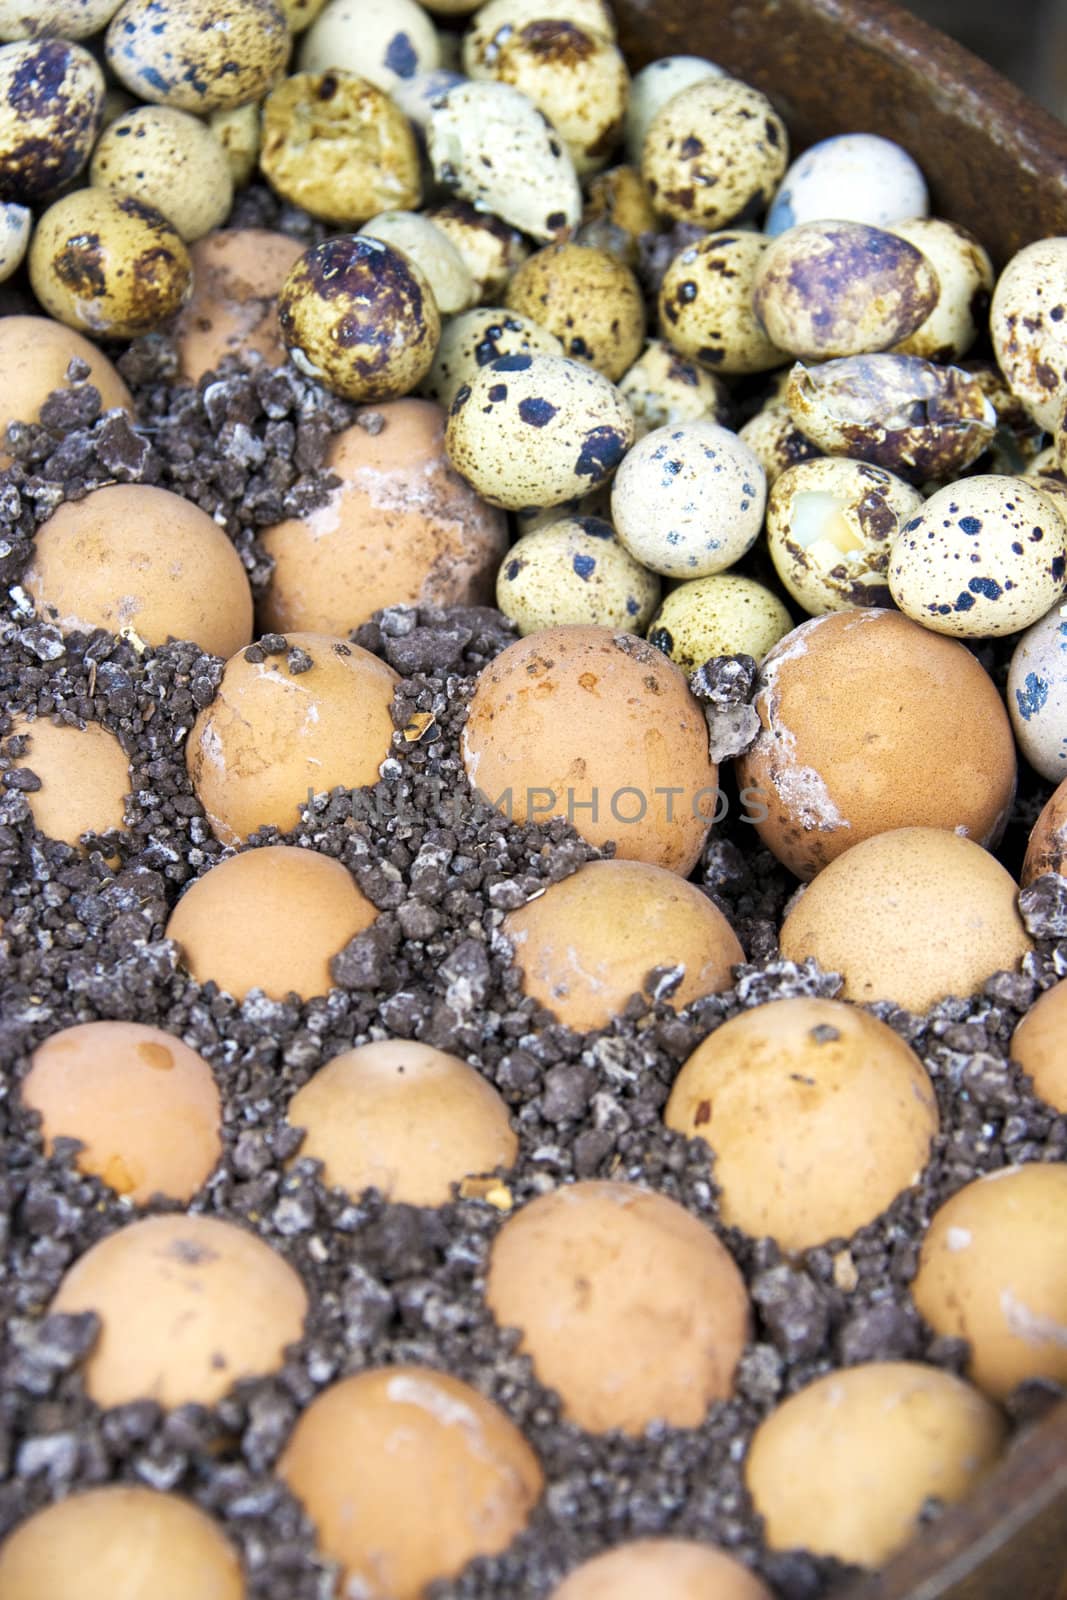 Image of chicken and quail's eggs being baked in salt crystals at Guilin, China..